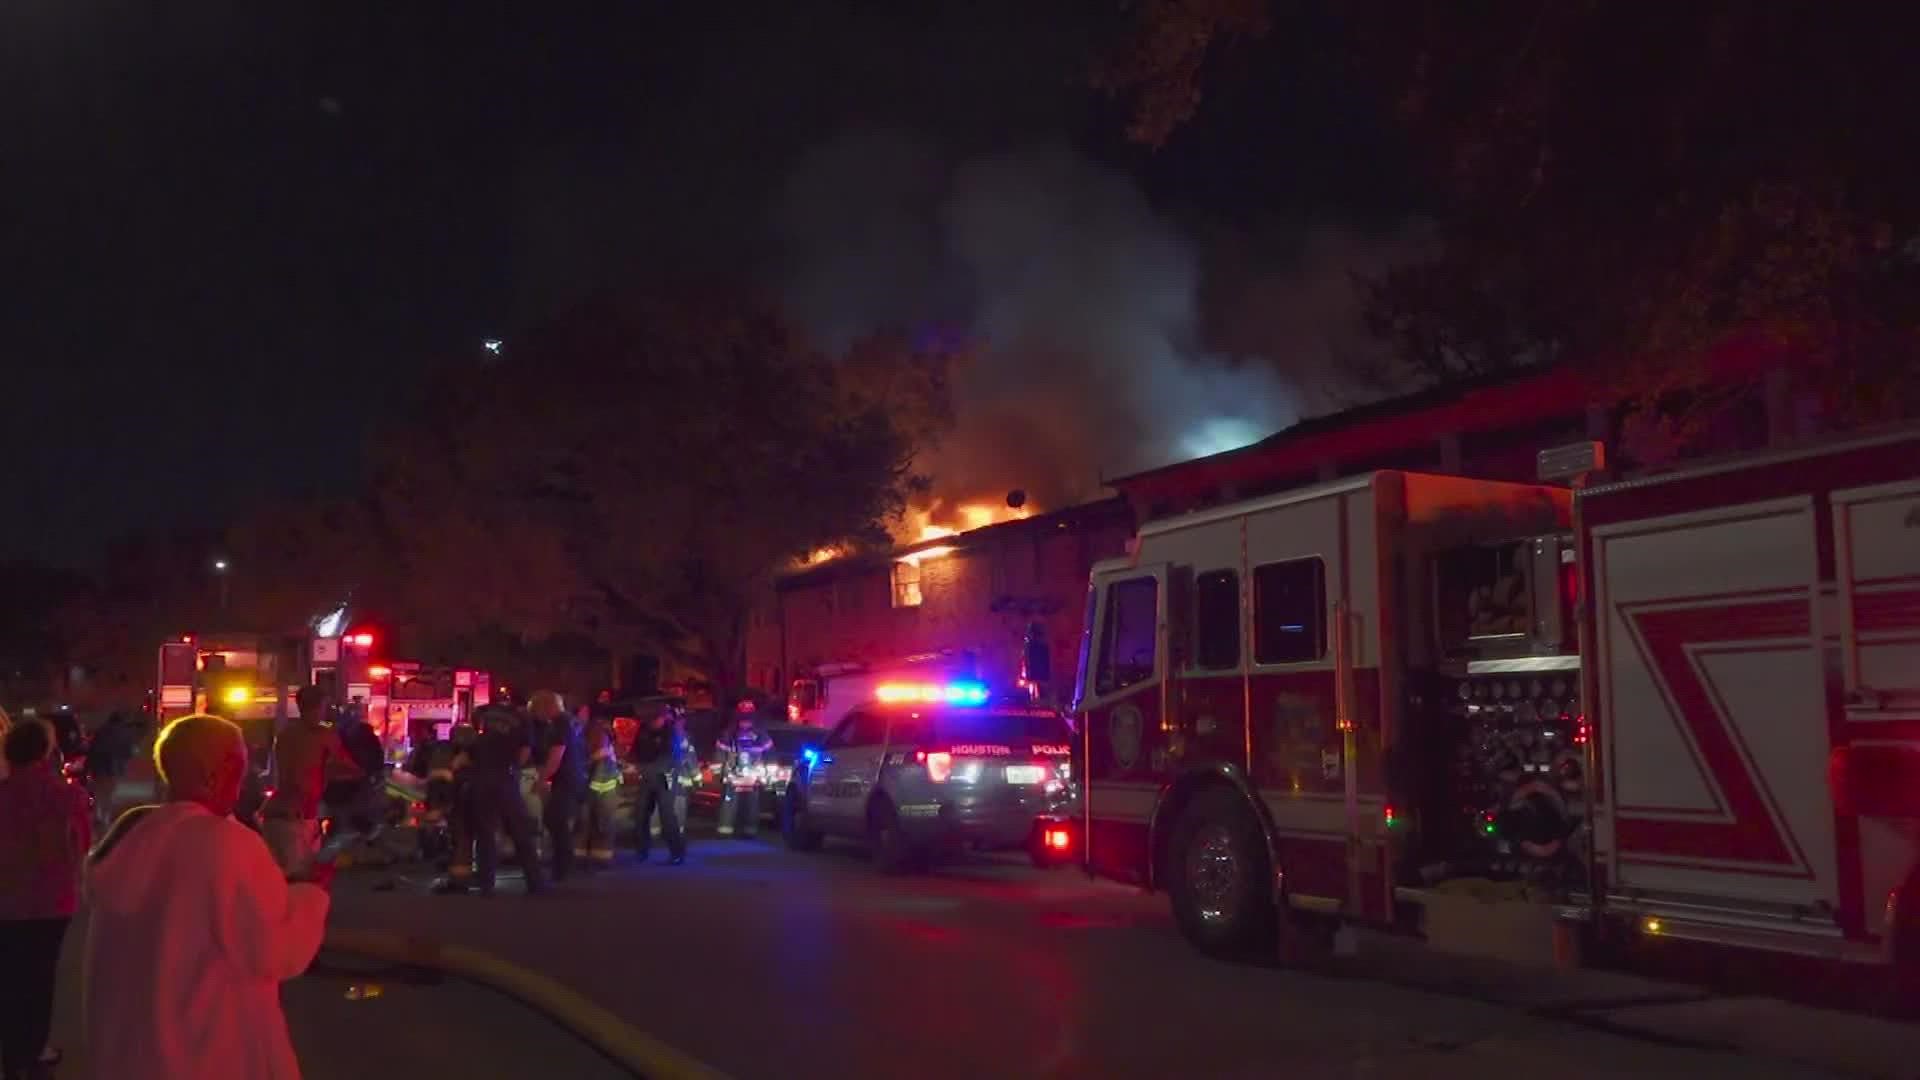 Only one person was treated for smoke inhalation and thankfully no other injuries were reported, according to the Houston Fire Department.